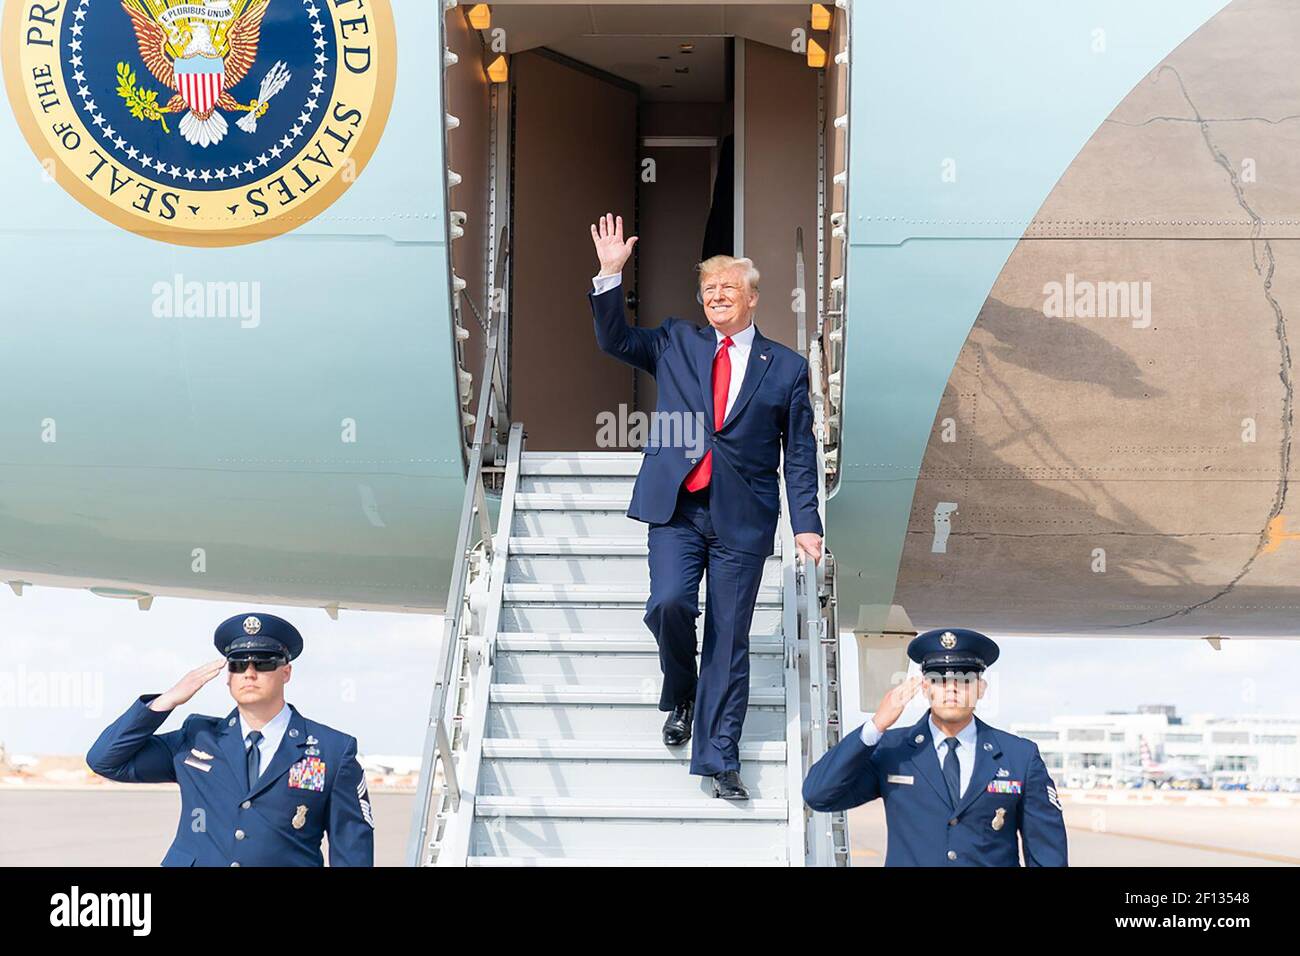 President Donald Trump disembarks Air Force One at Austin-Bergstrom International Airport in Austin Texas Wednesday Nov. 20 2019 where he was greeted by Texas Lt. Gov. Dan Patrick and Texas Attorney General Ken Paxton. Stock Photo